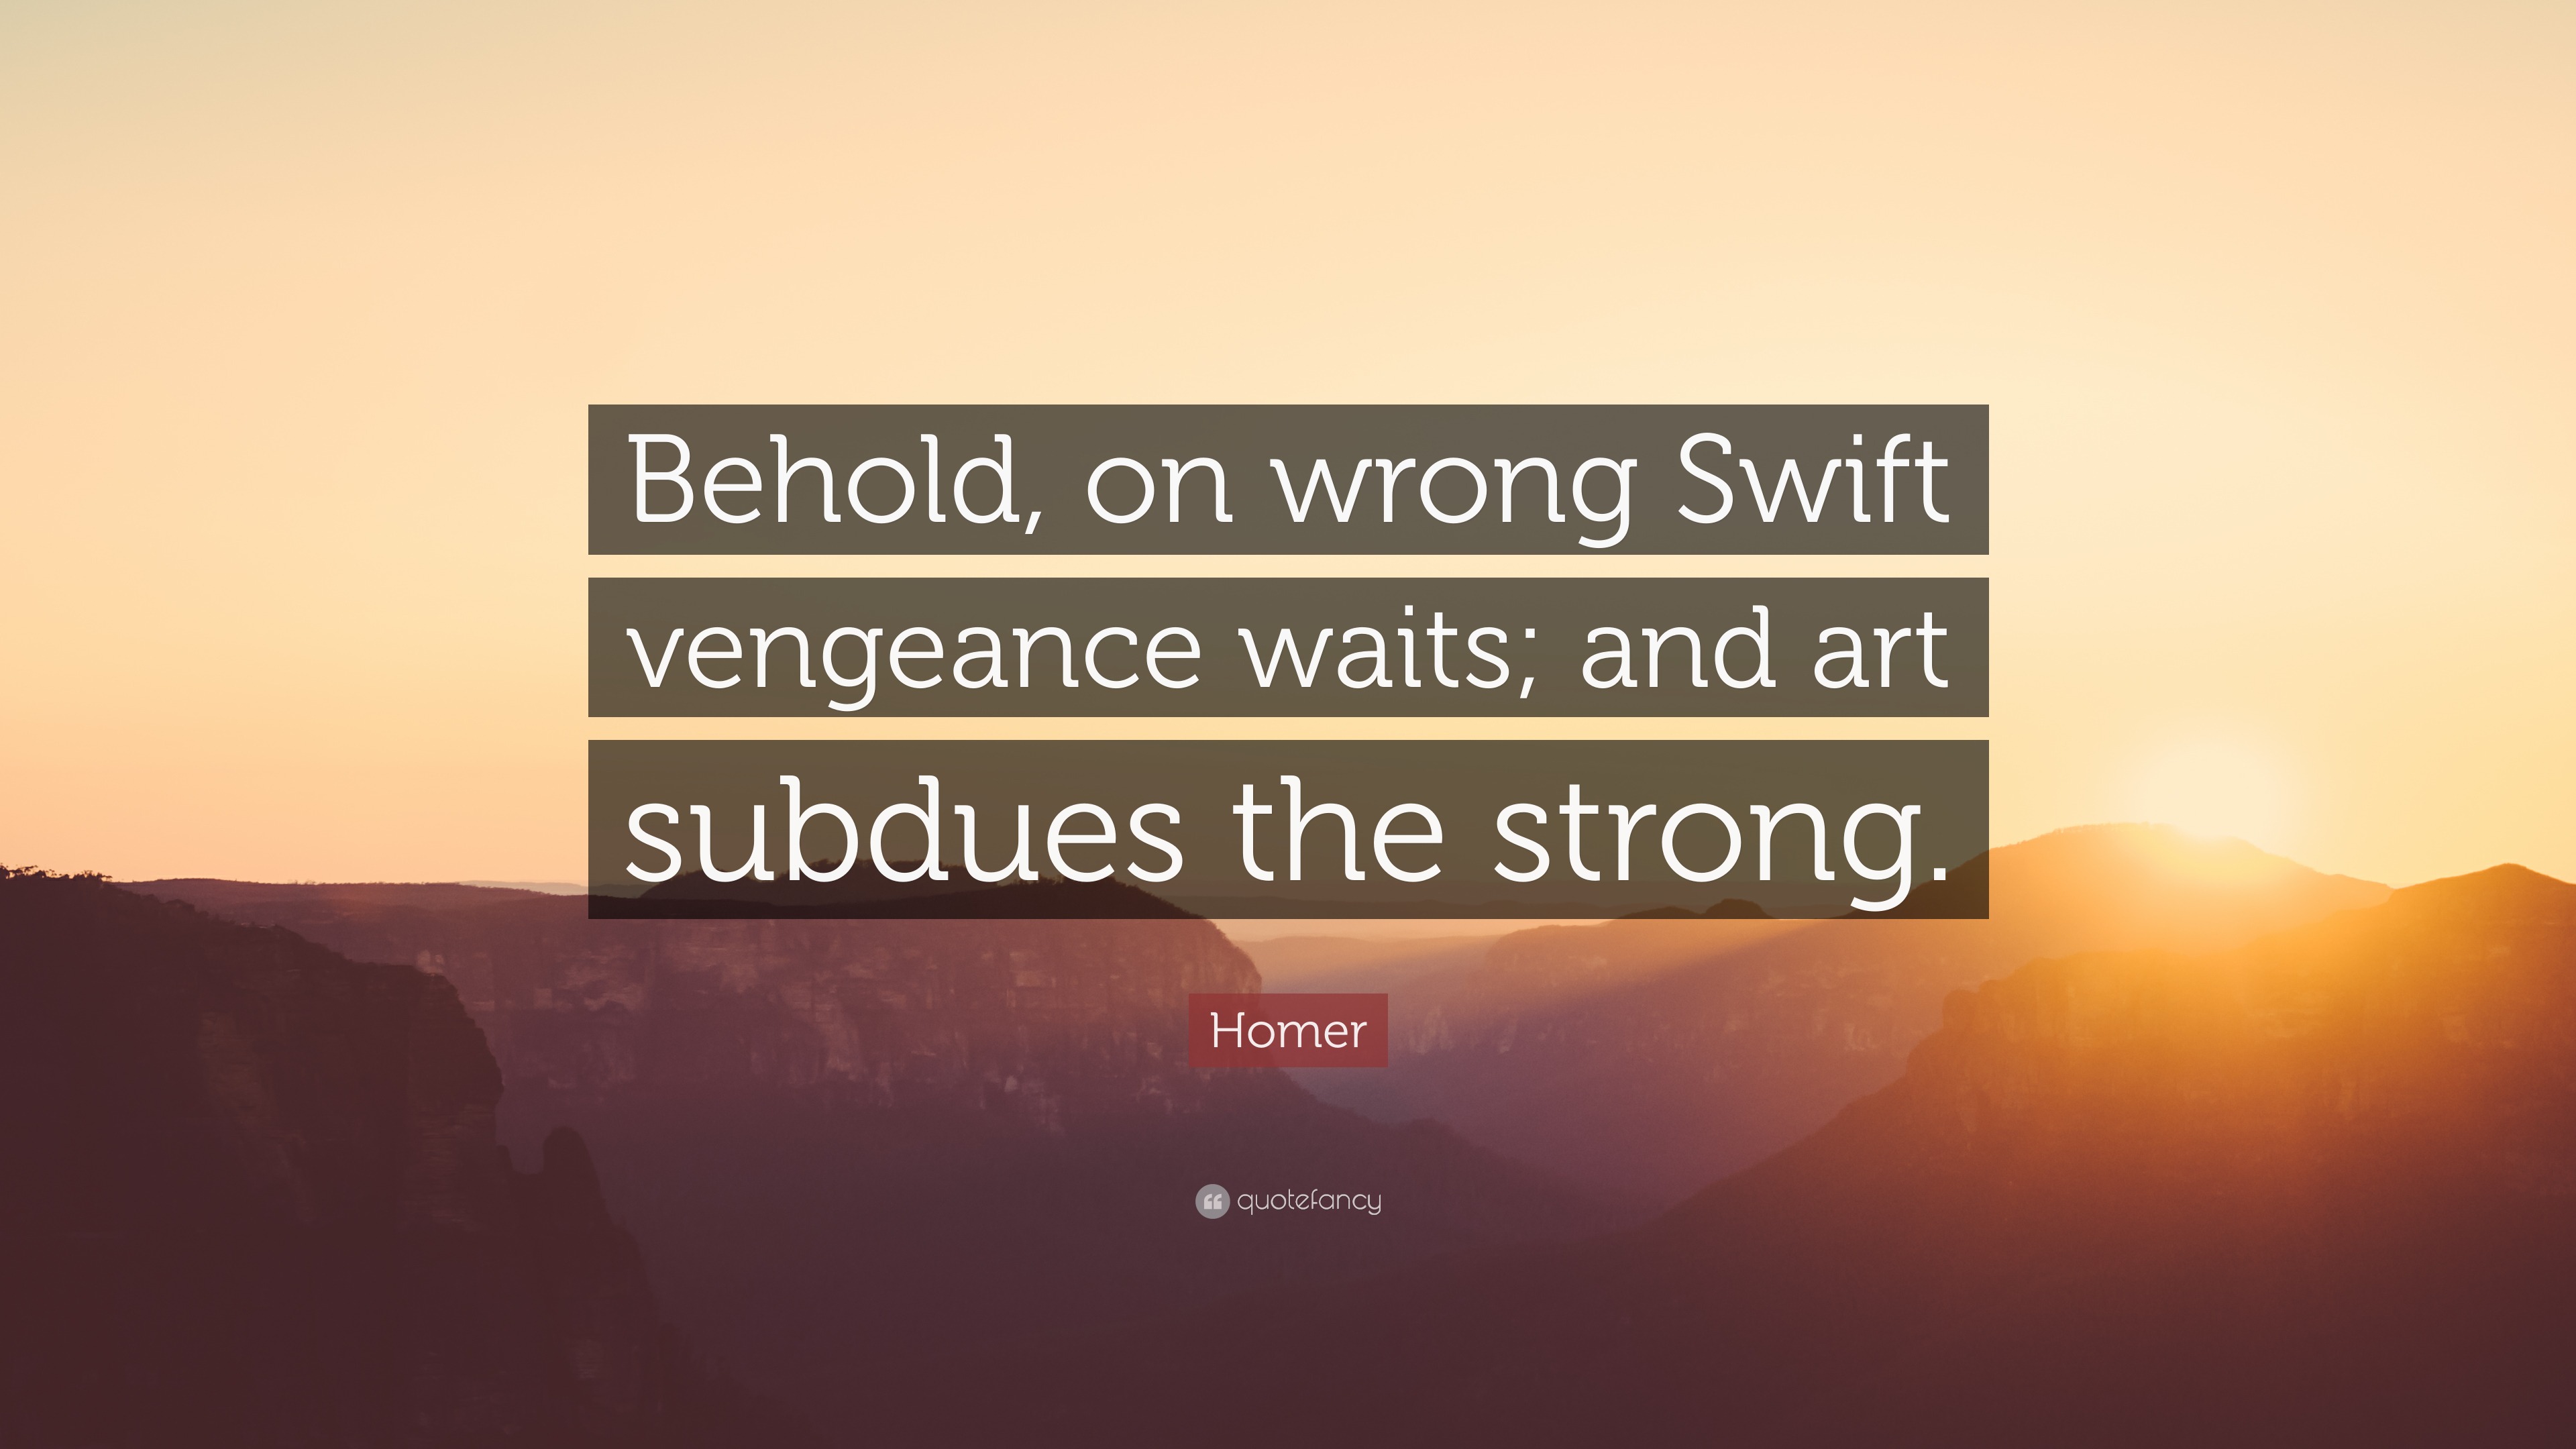 Homer Quote: “Behold, on wrong Swift vengeance waits; and art subdues ...